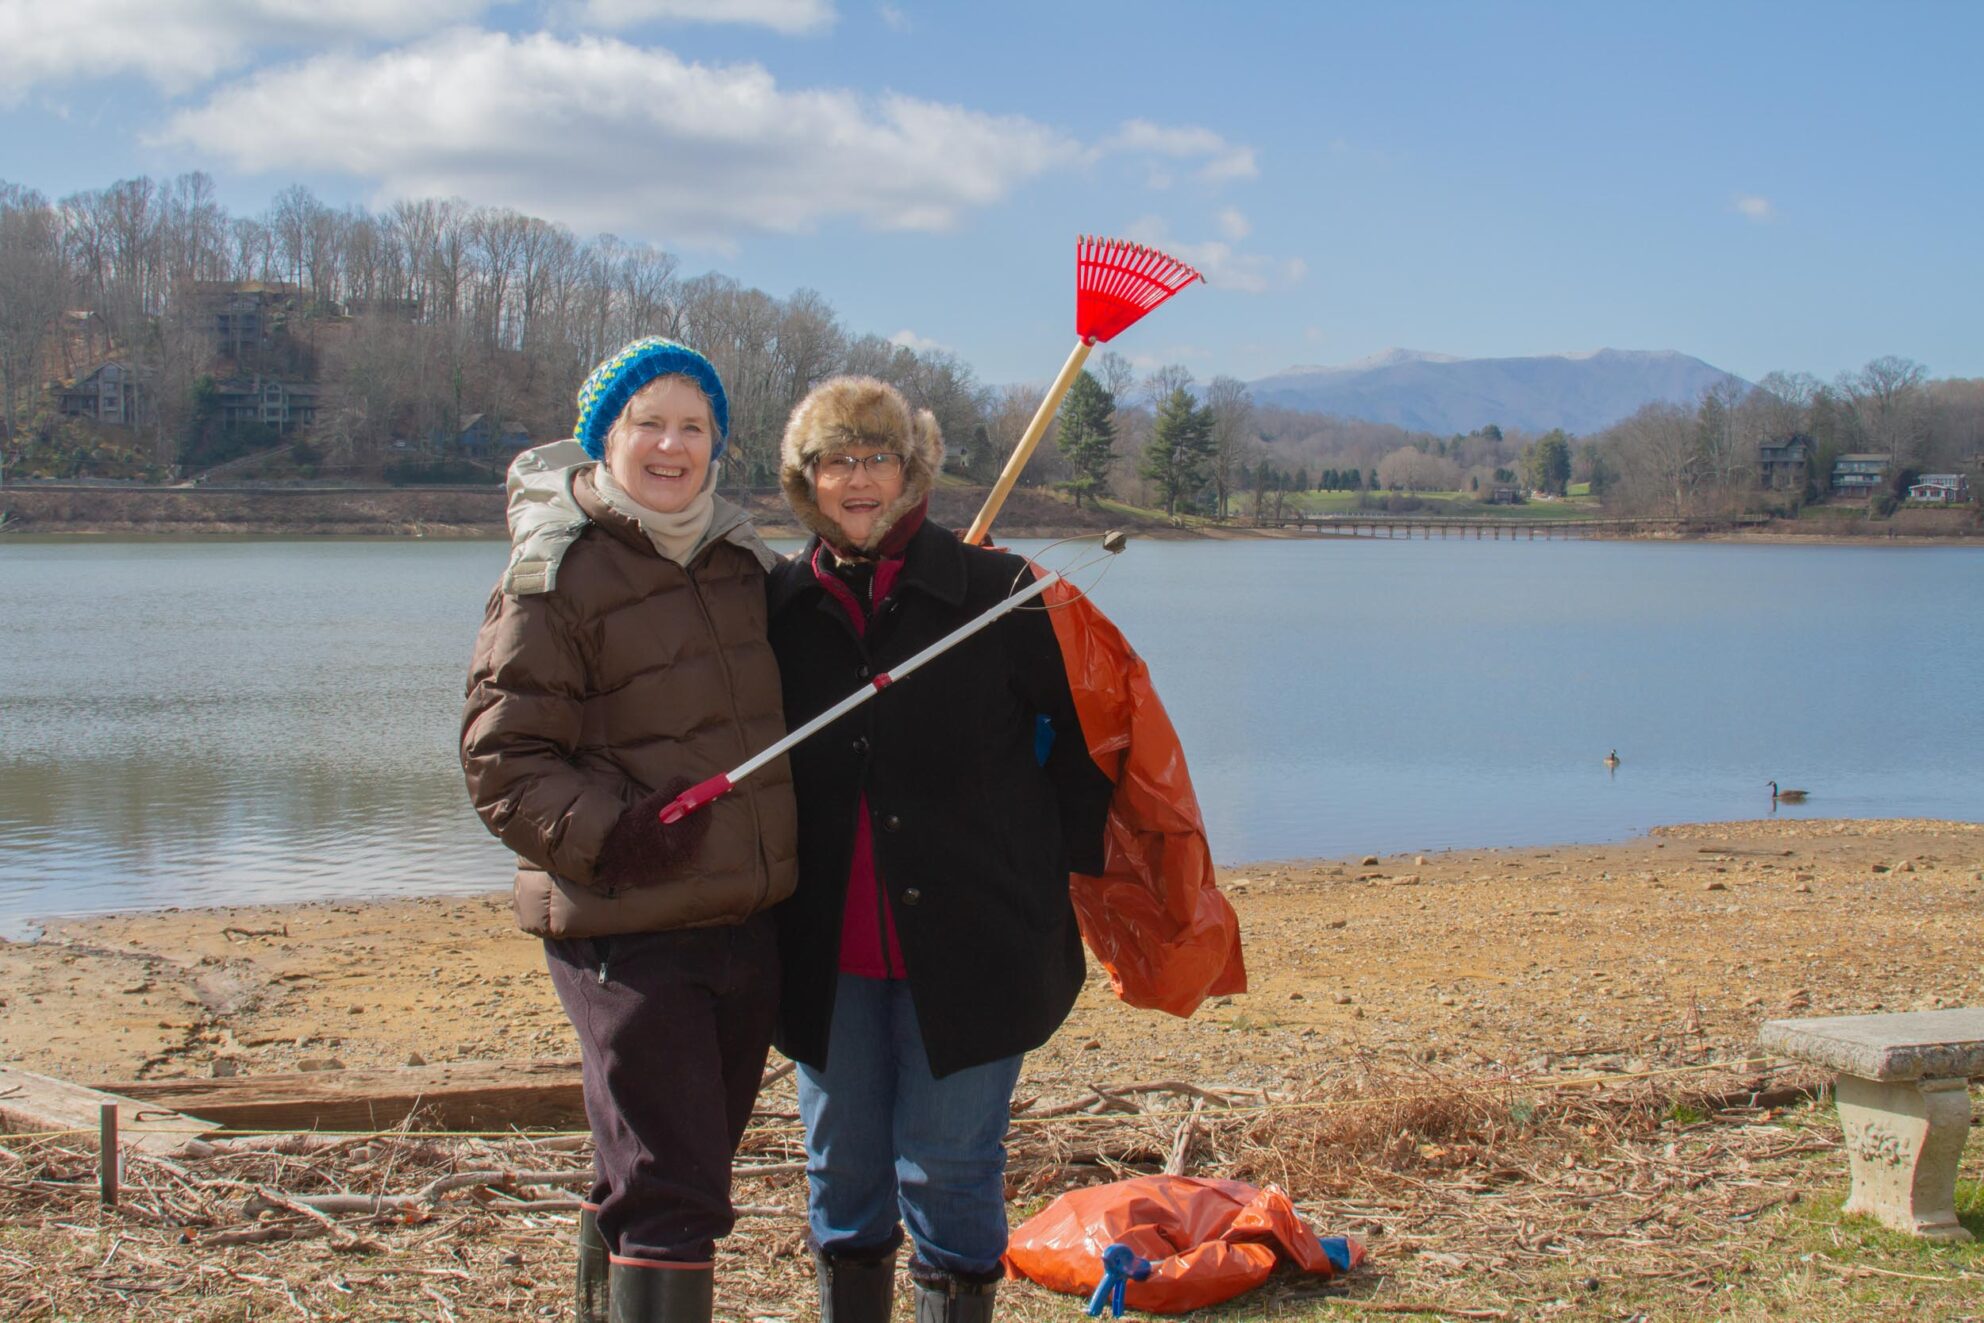 Annual Lake Junaluska Cleanup day is a great community service opportunity  - Lake Junaluska Conference & Retreat Center